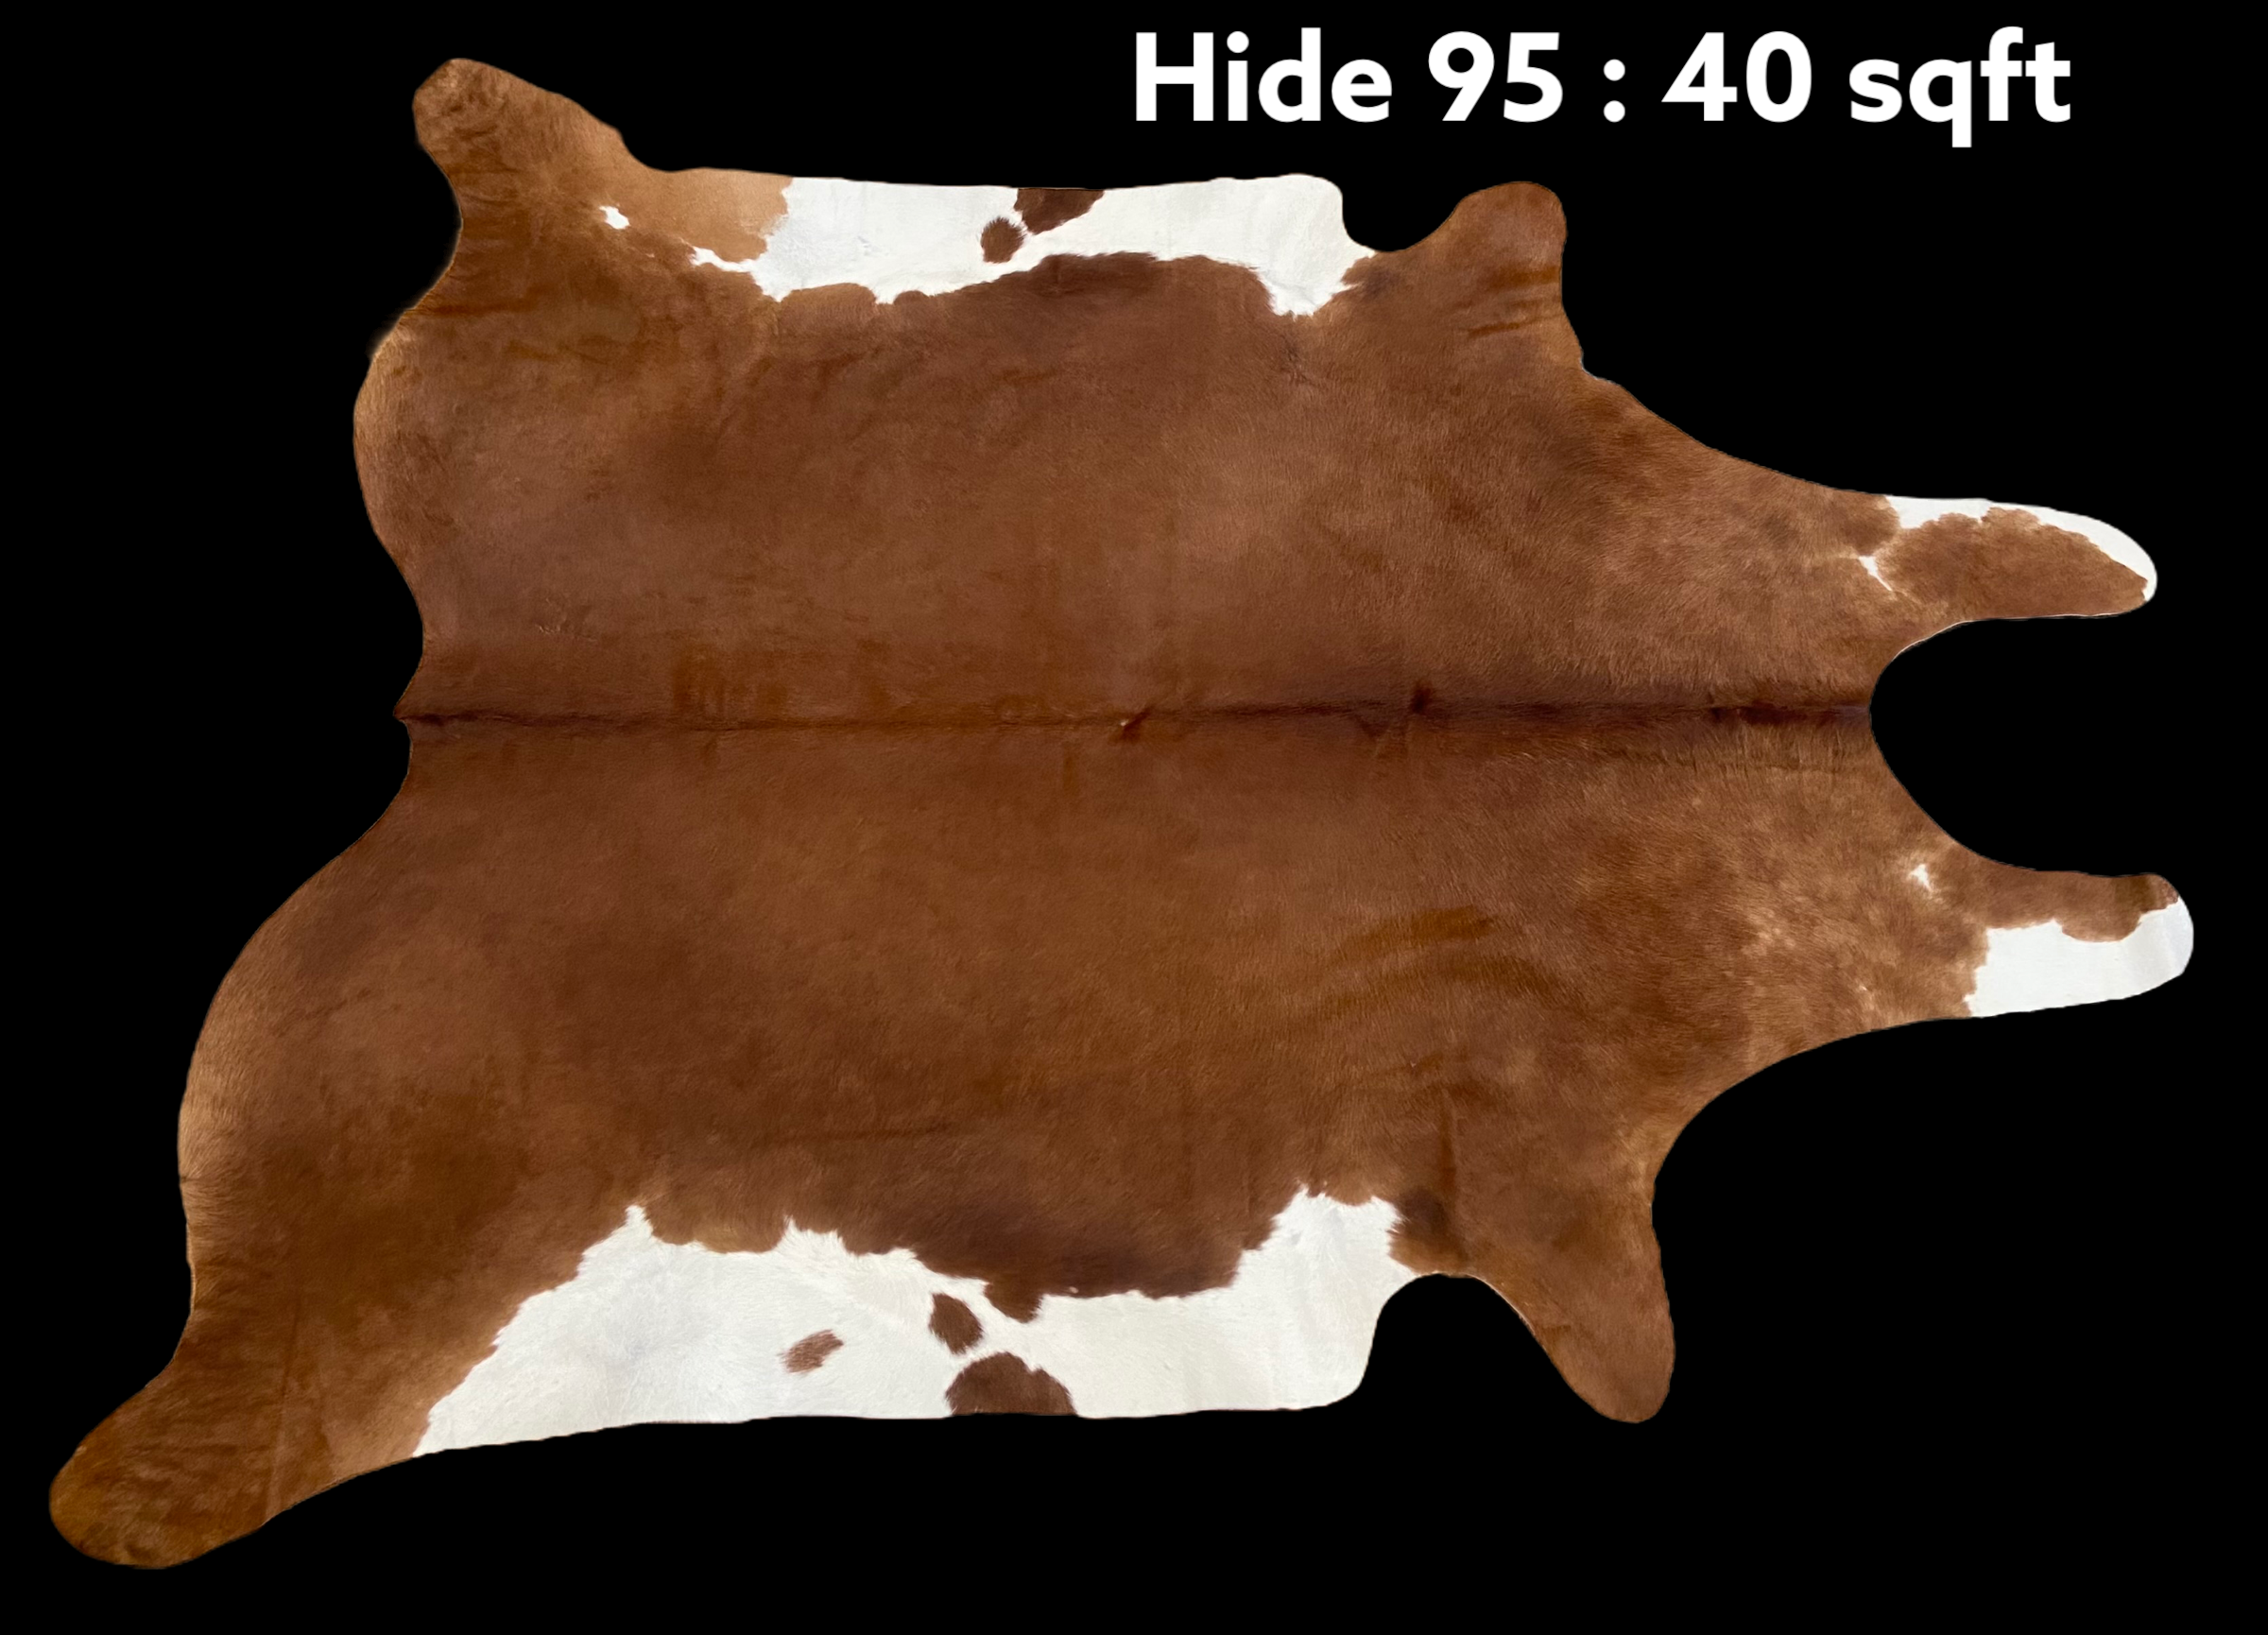 Natural Hair On Cow Hide : This Hide Is Perfect For Wall Hanging, Leather Rugs, Leather Upholstery & Leather Accessories. (Hide95)